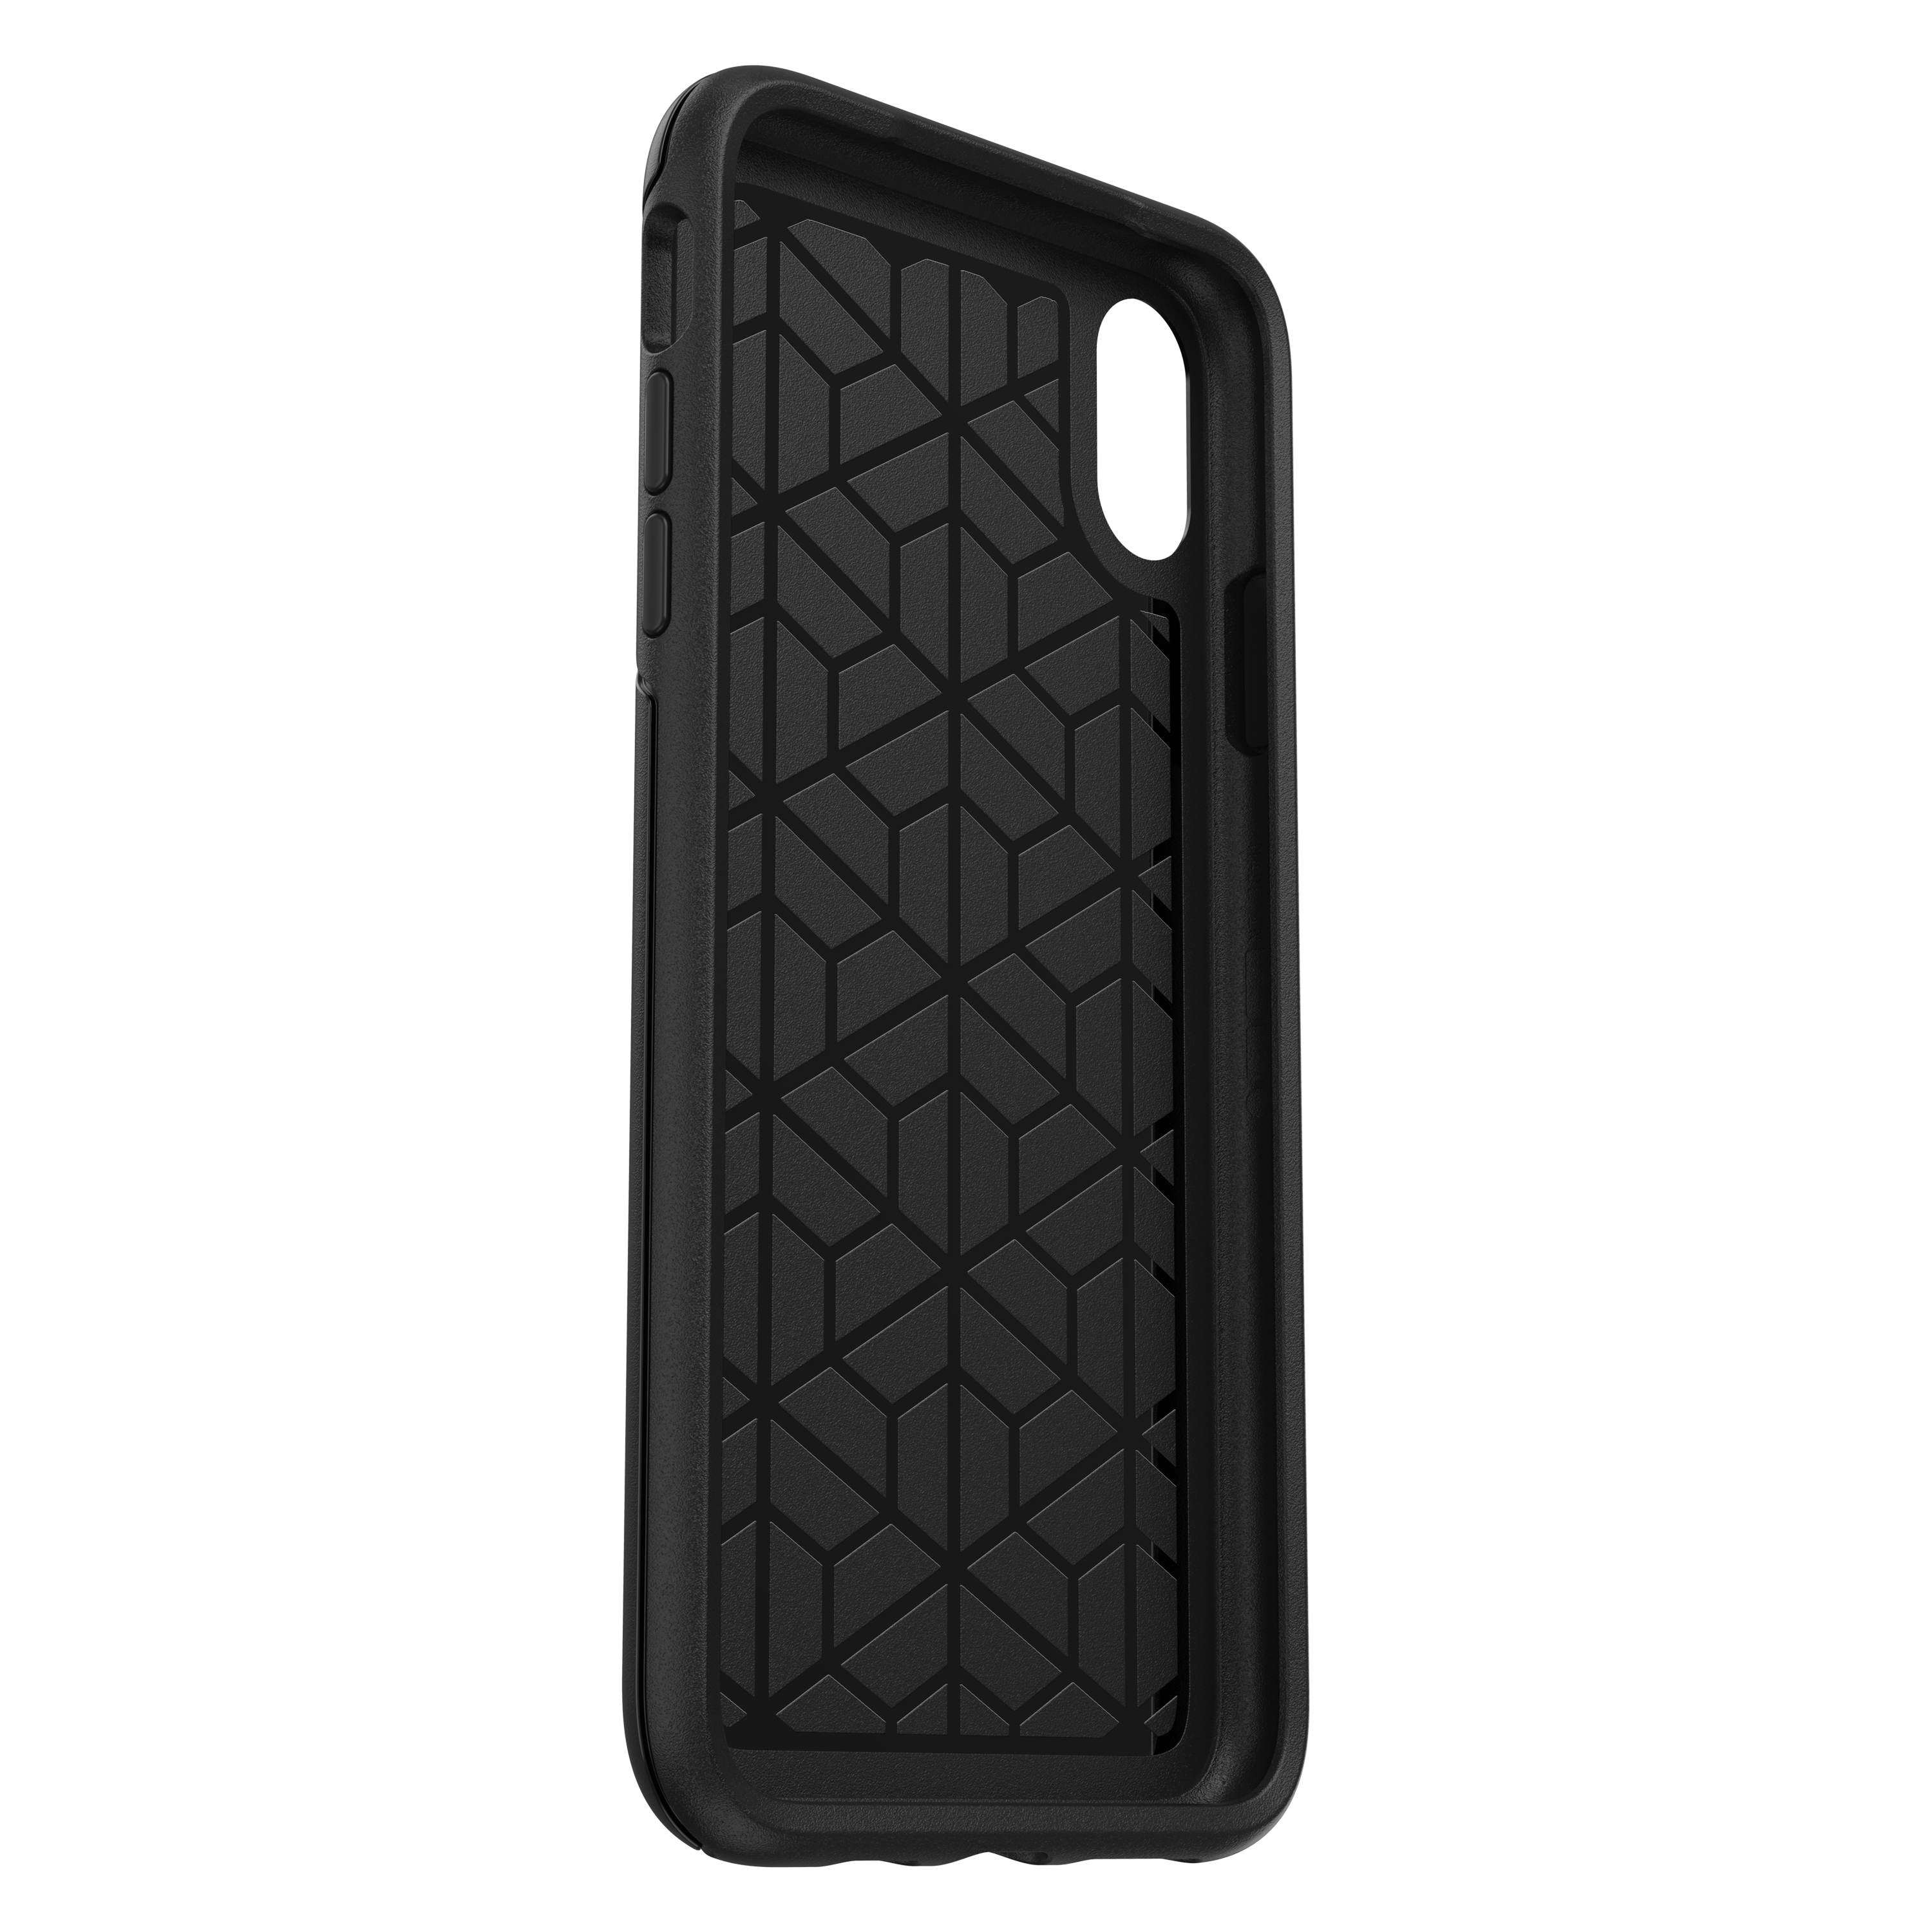 Backcover, Max, iPhone Schwarz XS Symmetry, Apple, OTTERBOX